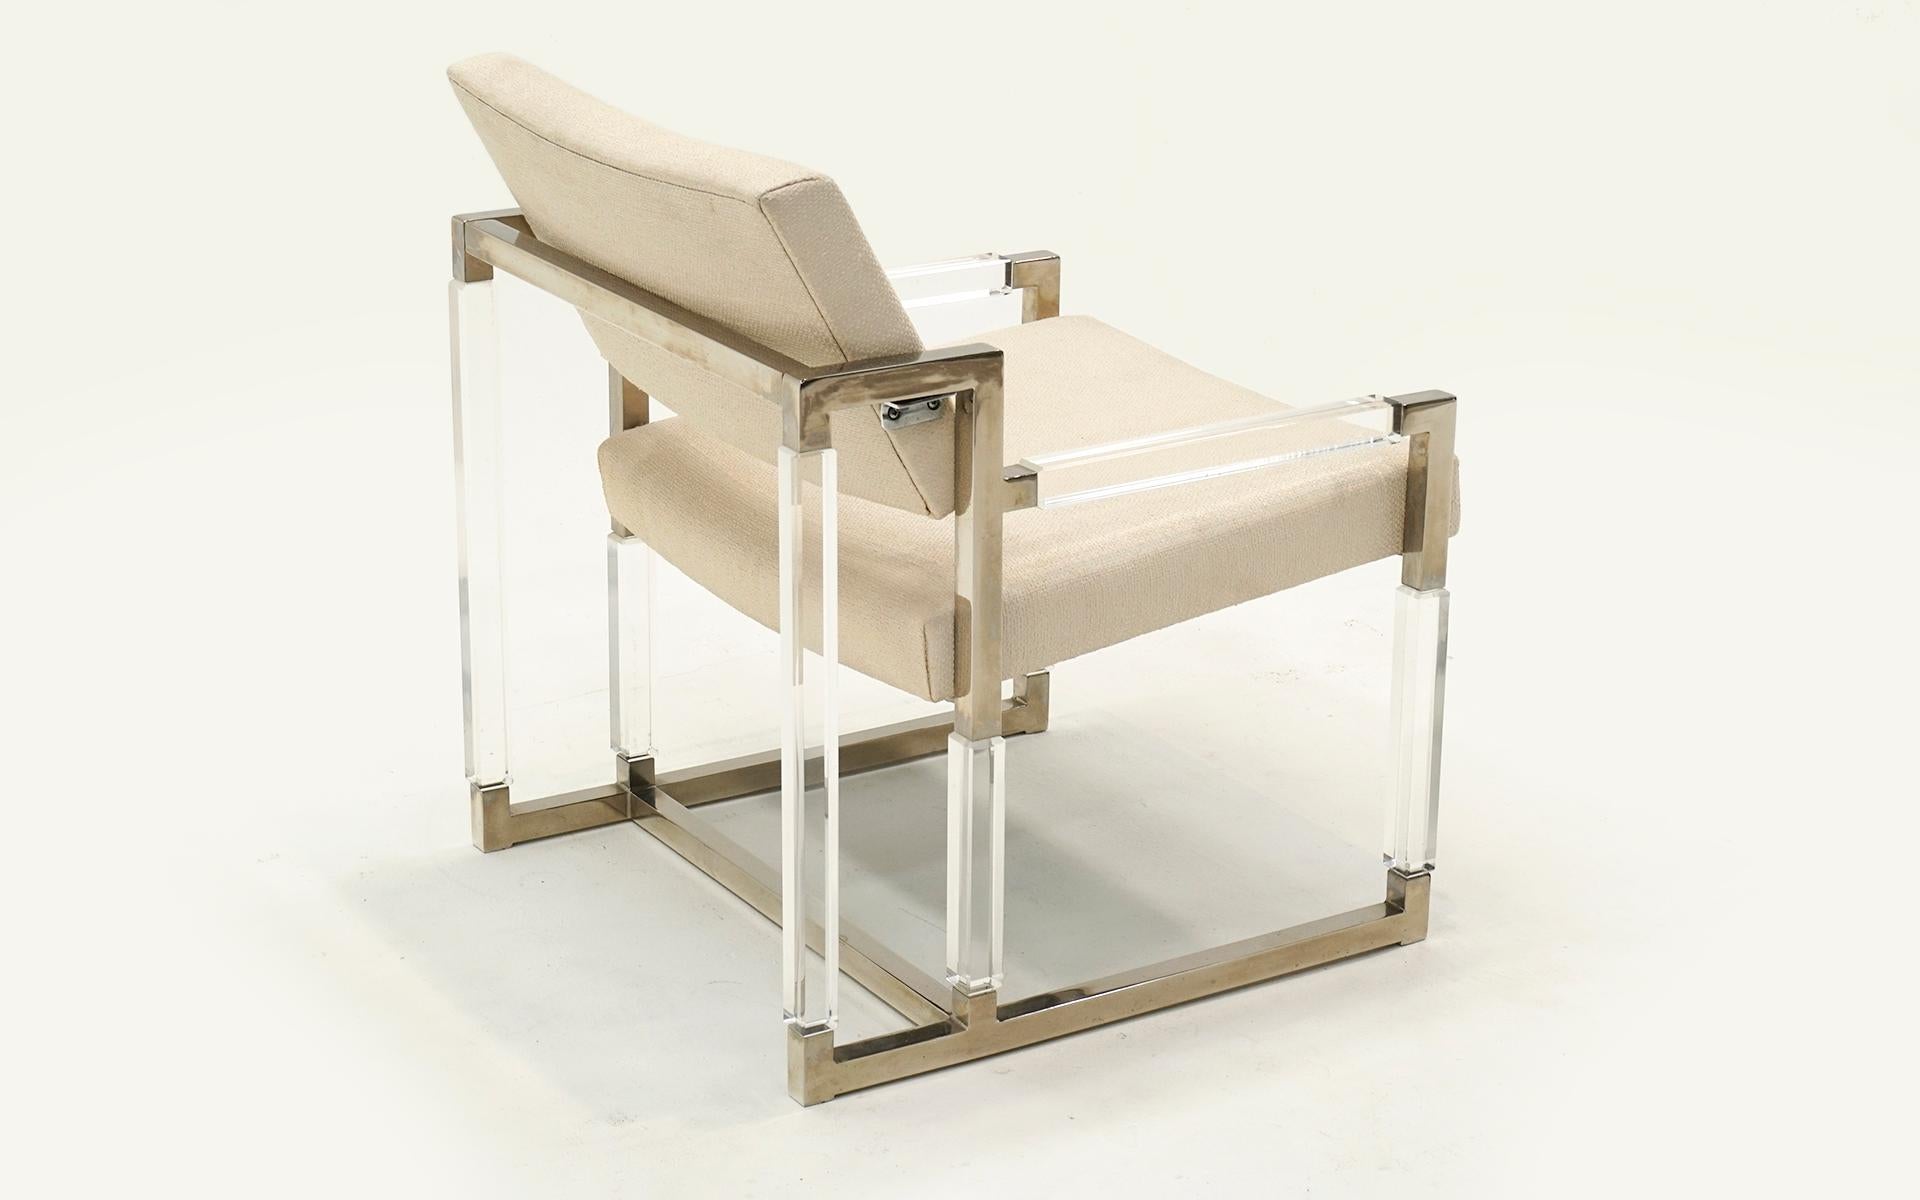 American Metric Lounge Chair by Charles Hollis Jones, 1965 #20 of 100 Made. Signed, Dated For Sale